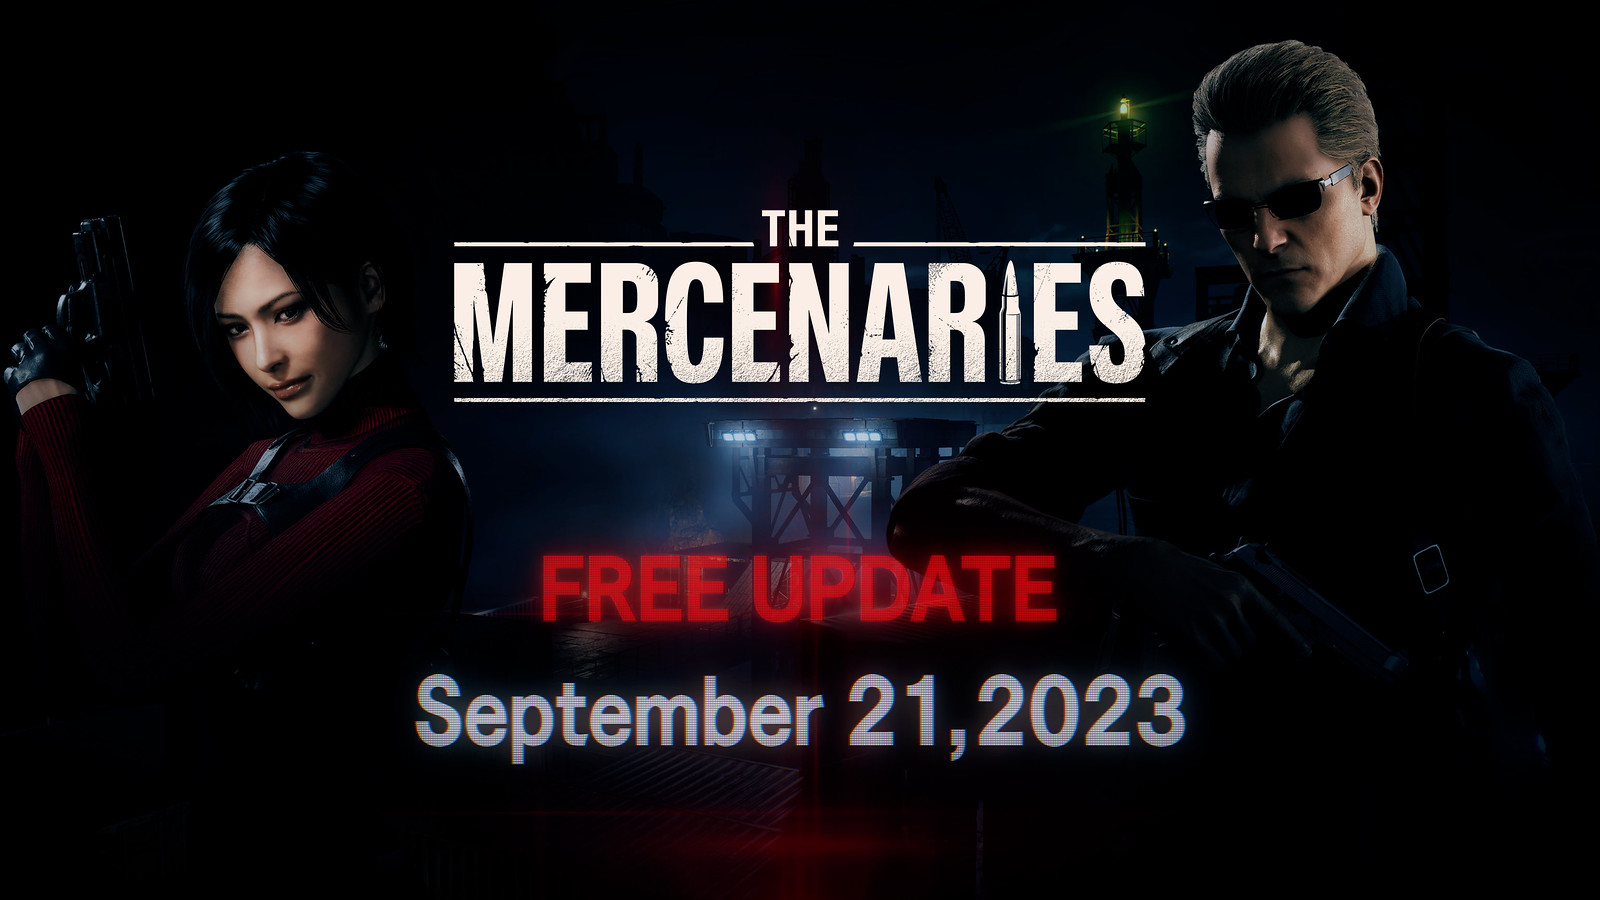 Ada Wong readies her handgun to the left side of the image, Albert Wesker stands to the right. Both are facing the viewer. Between sits the text: The Mercenaries. Free update. September 21, 2023.